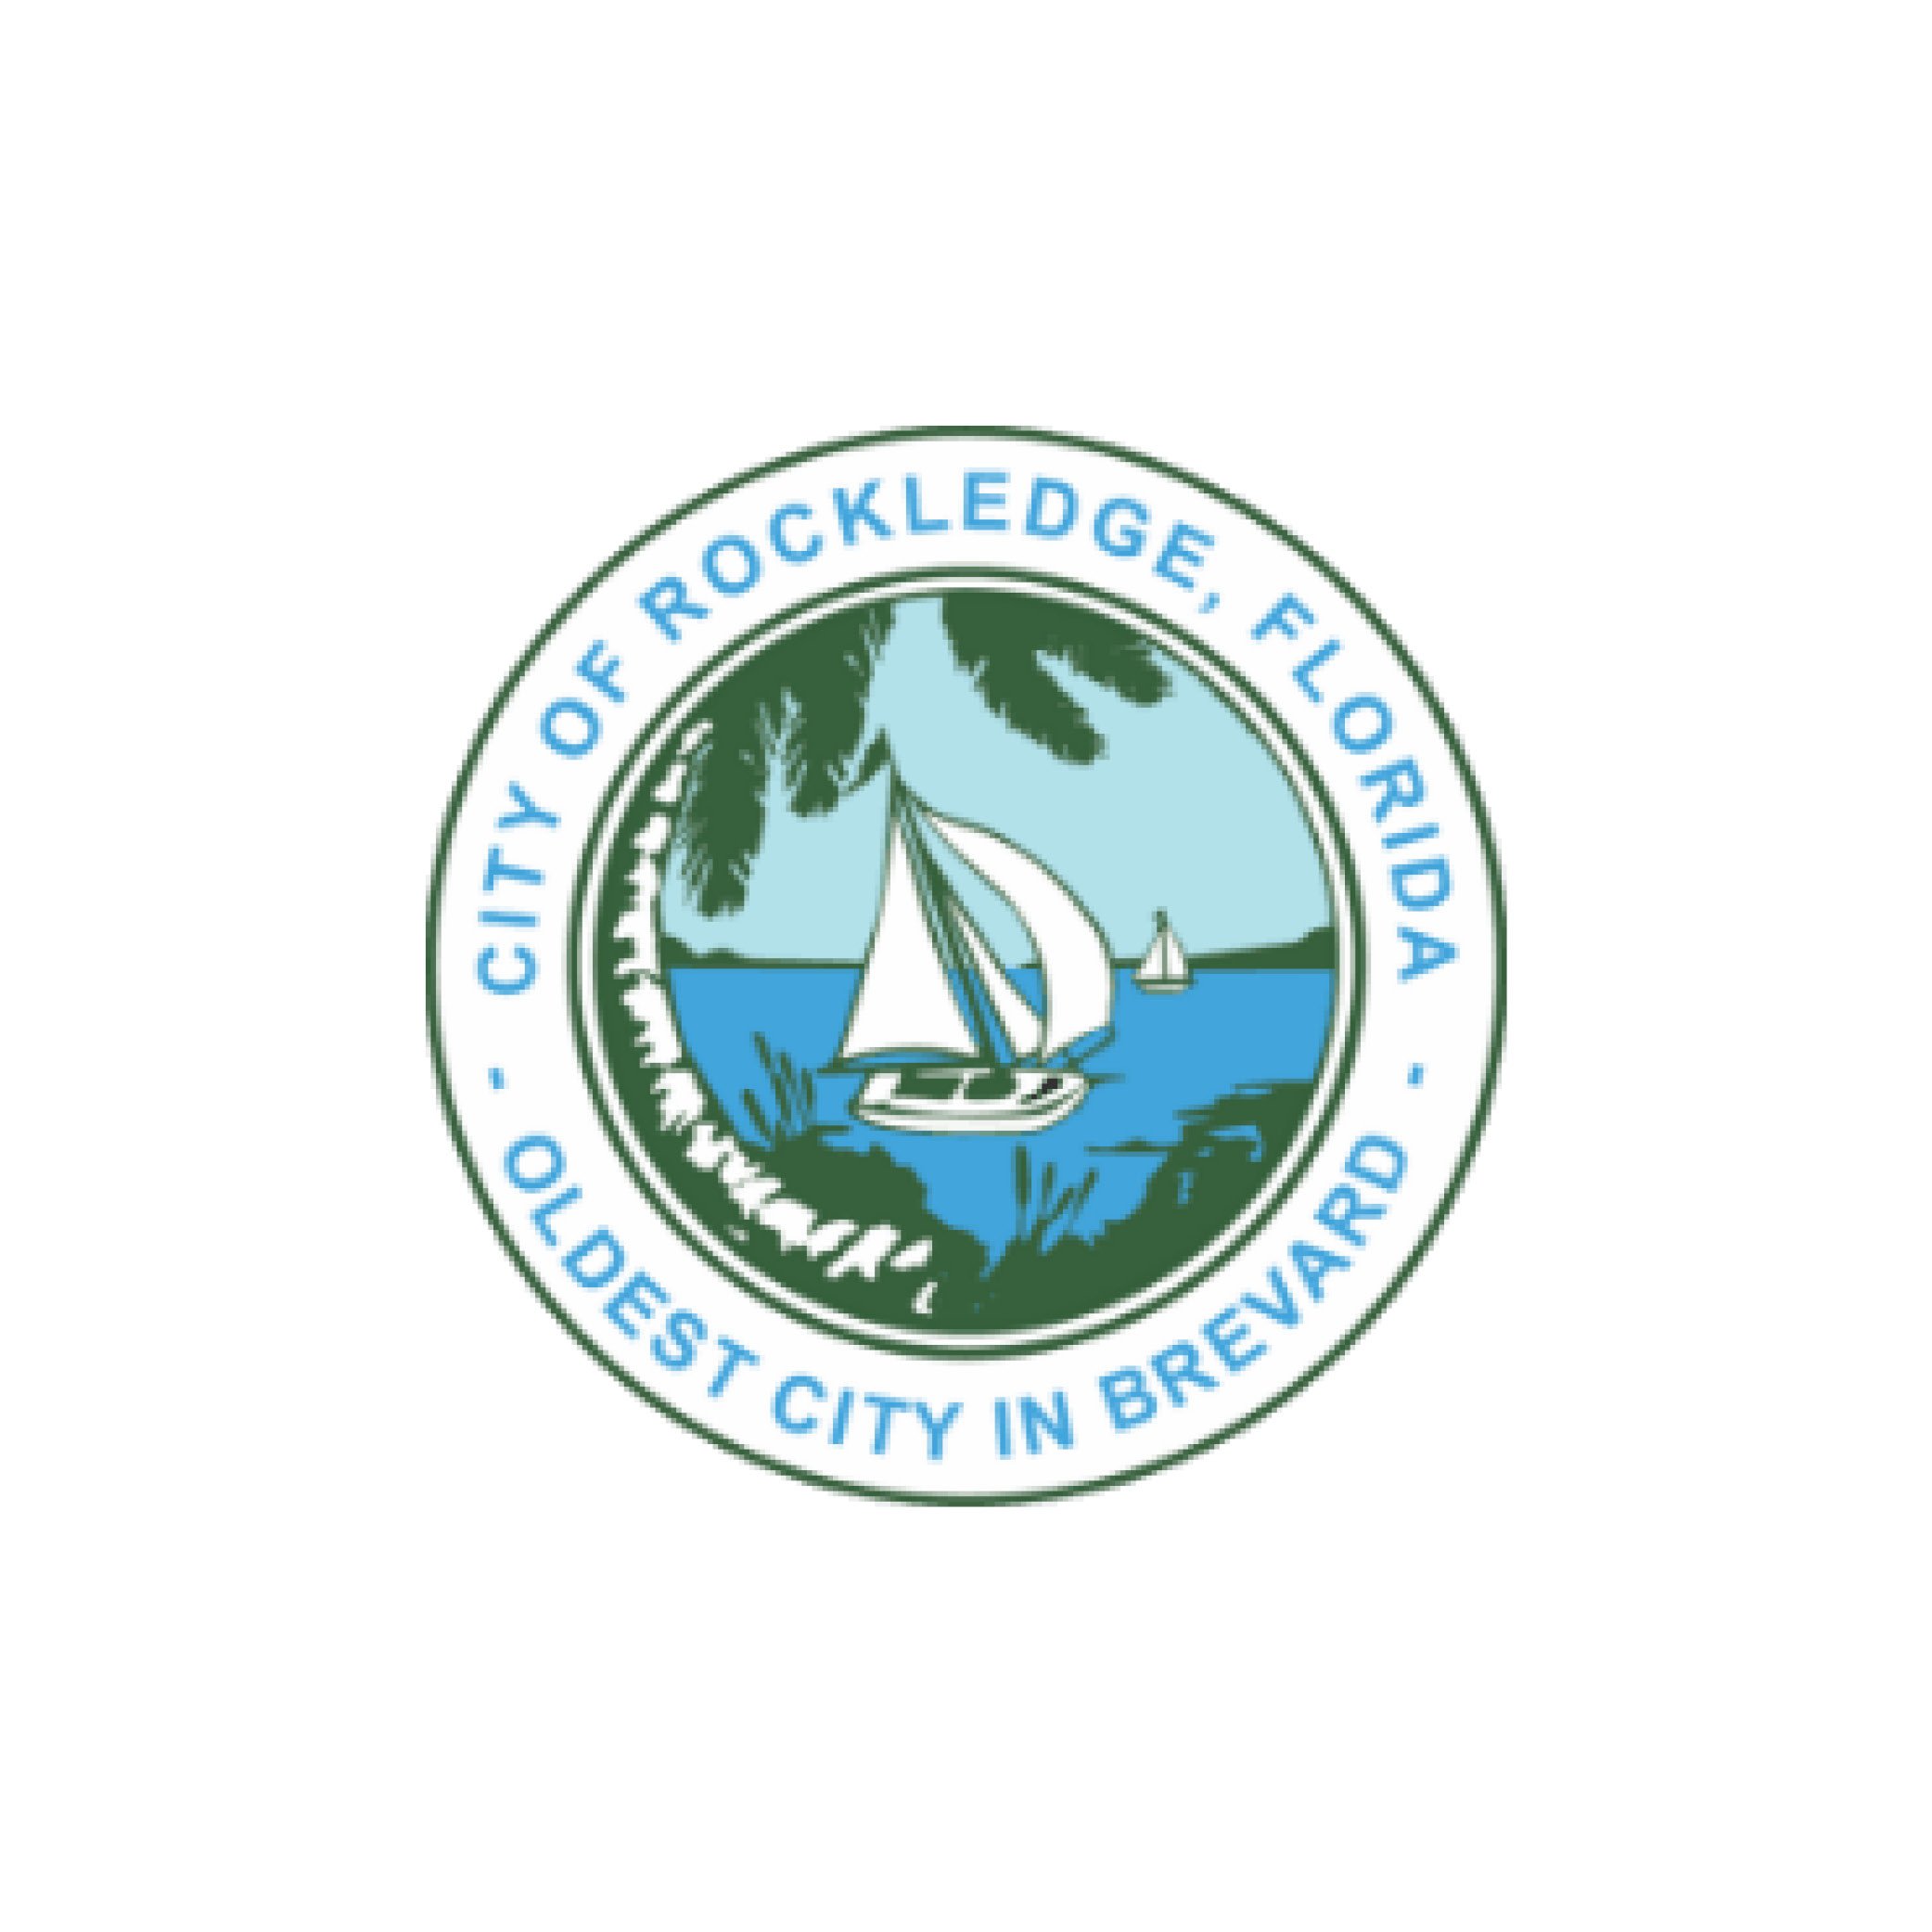 City of Rockledge